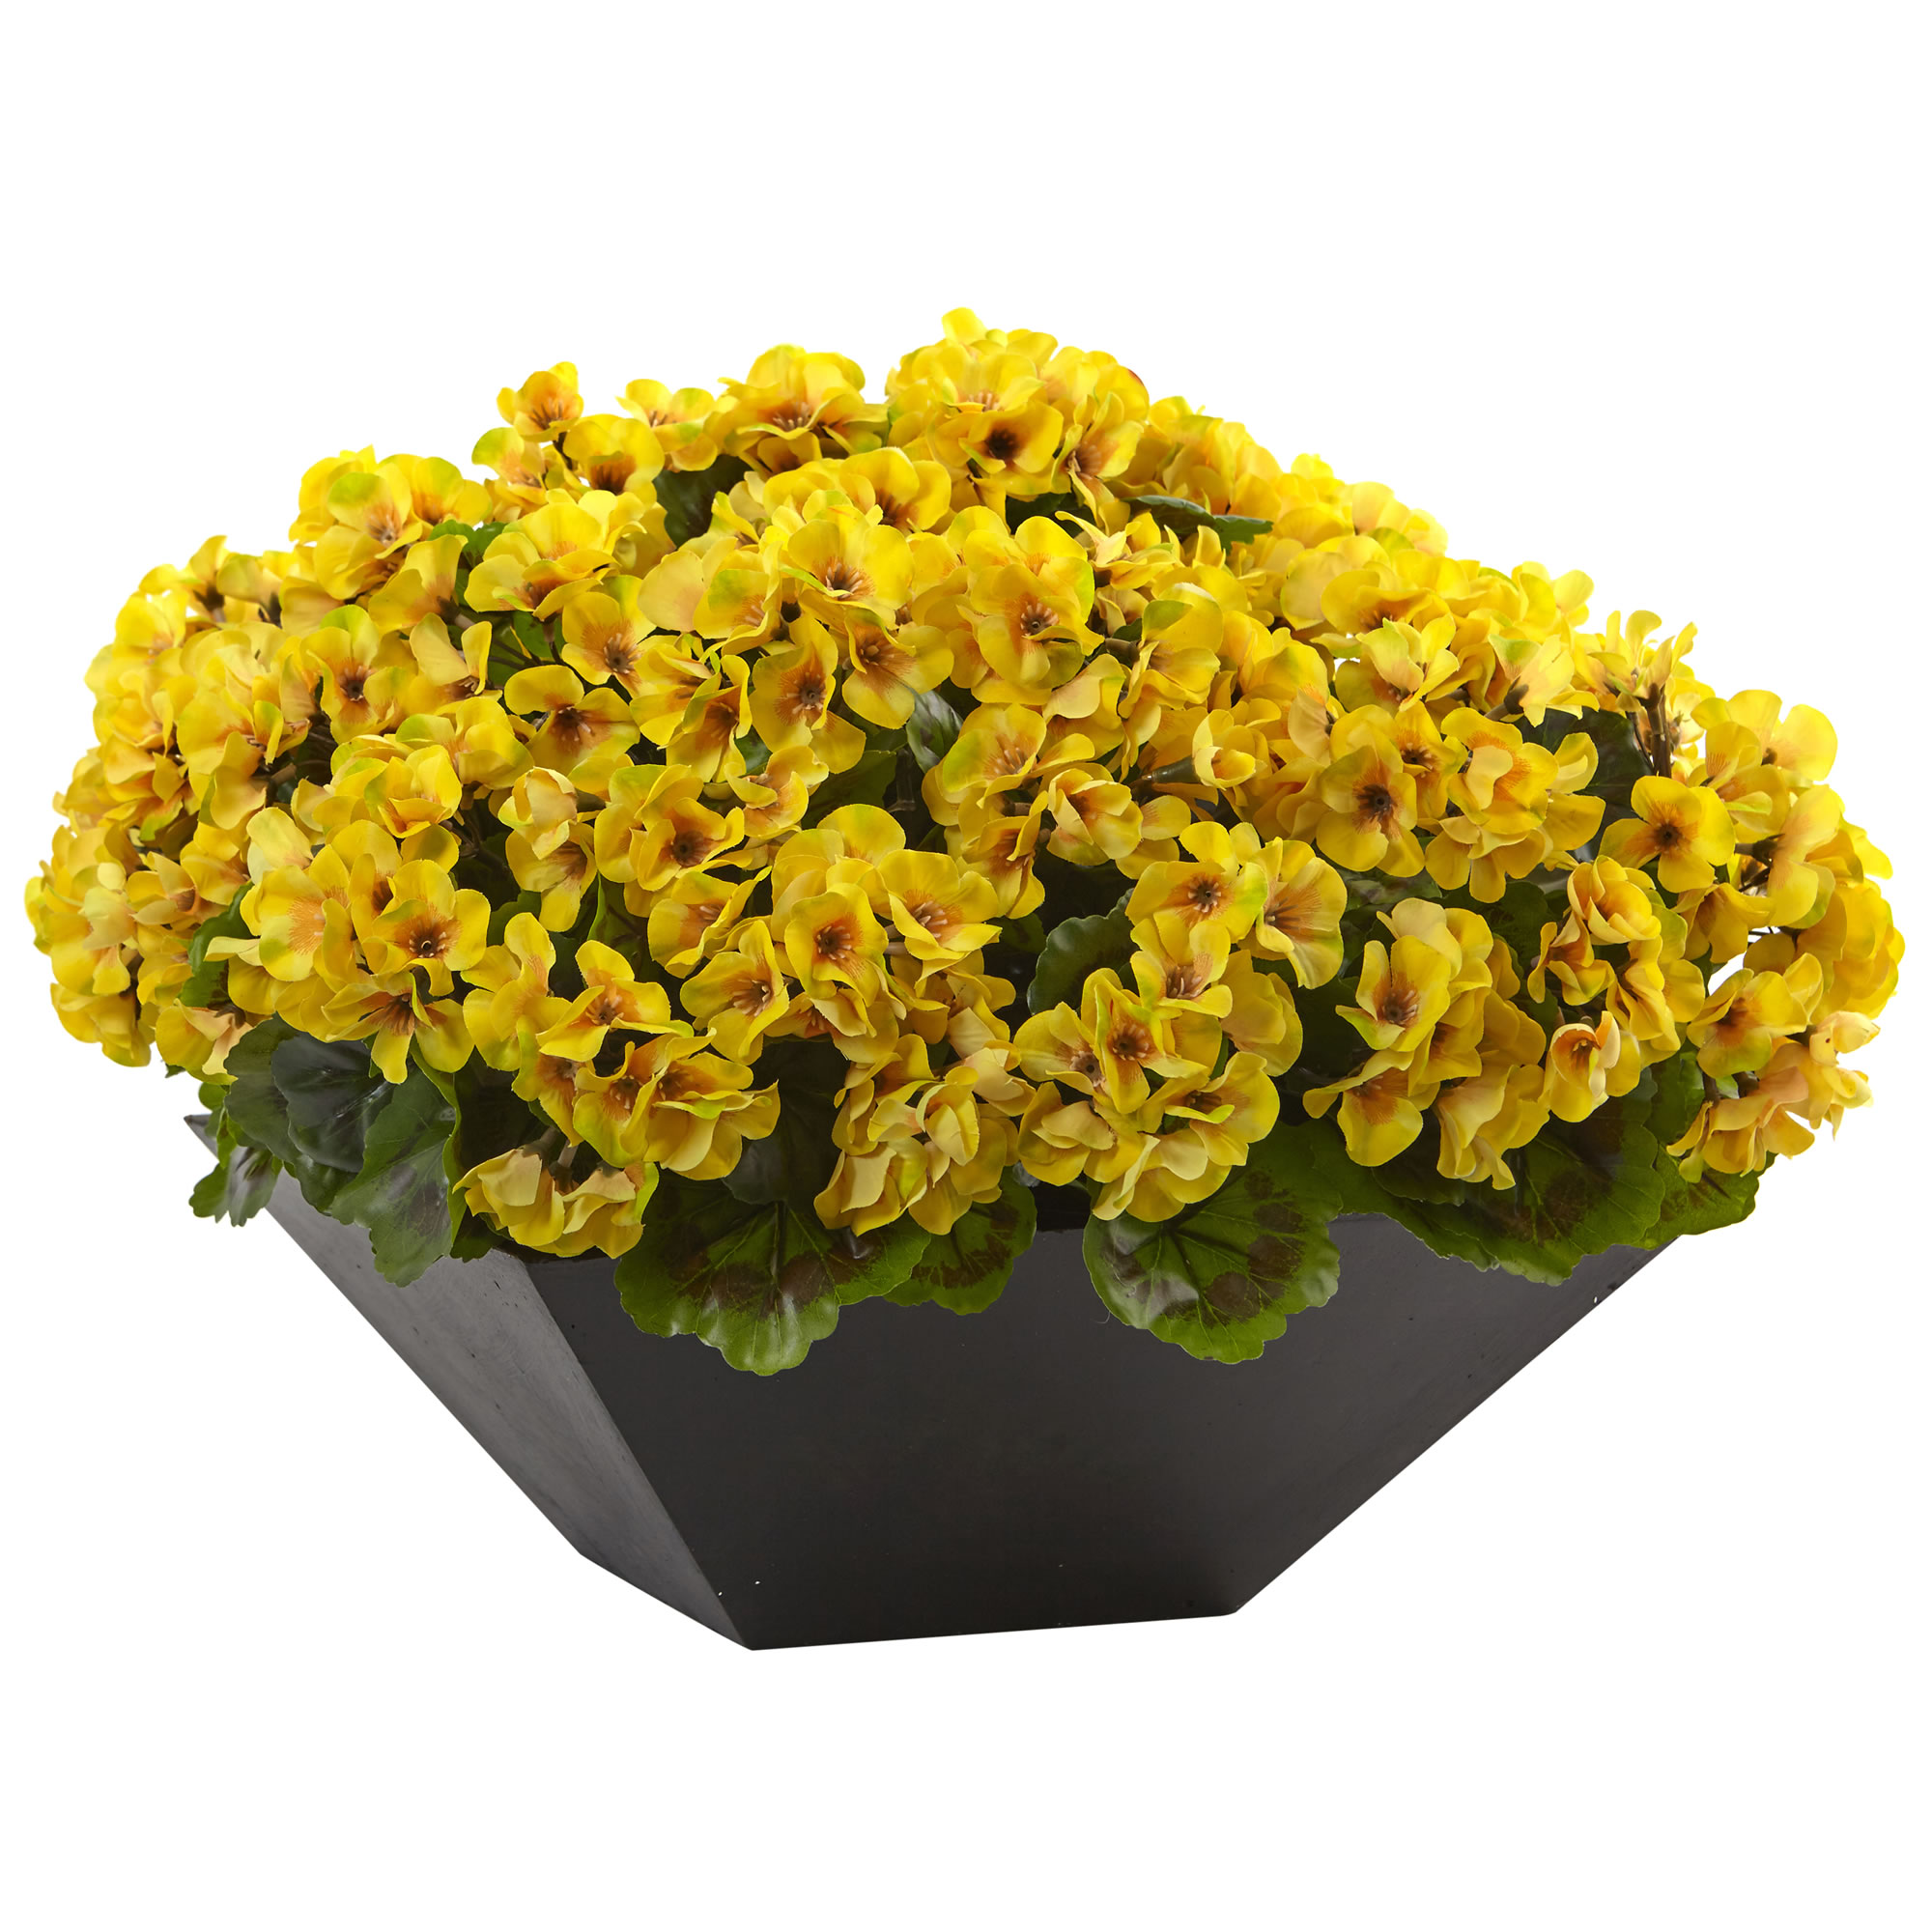 15 Inch Yellow Geranium In Black Planter: Limited Uv Protection